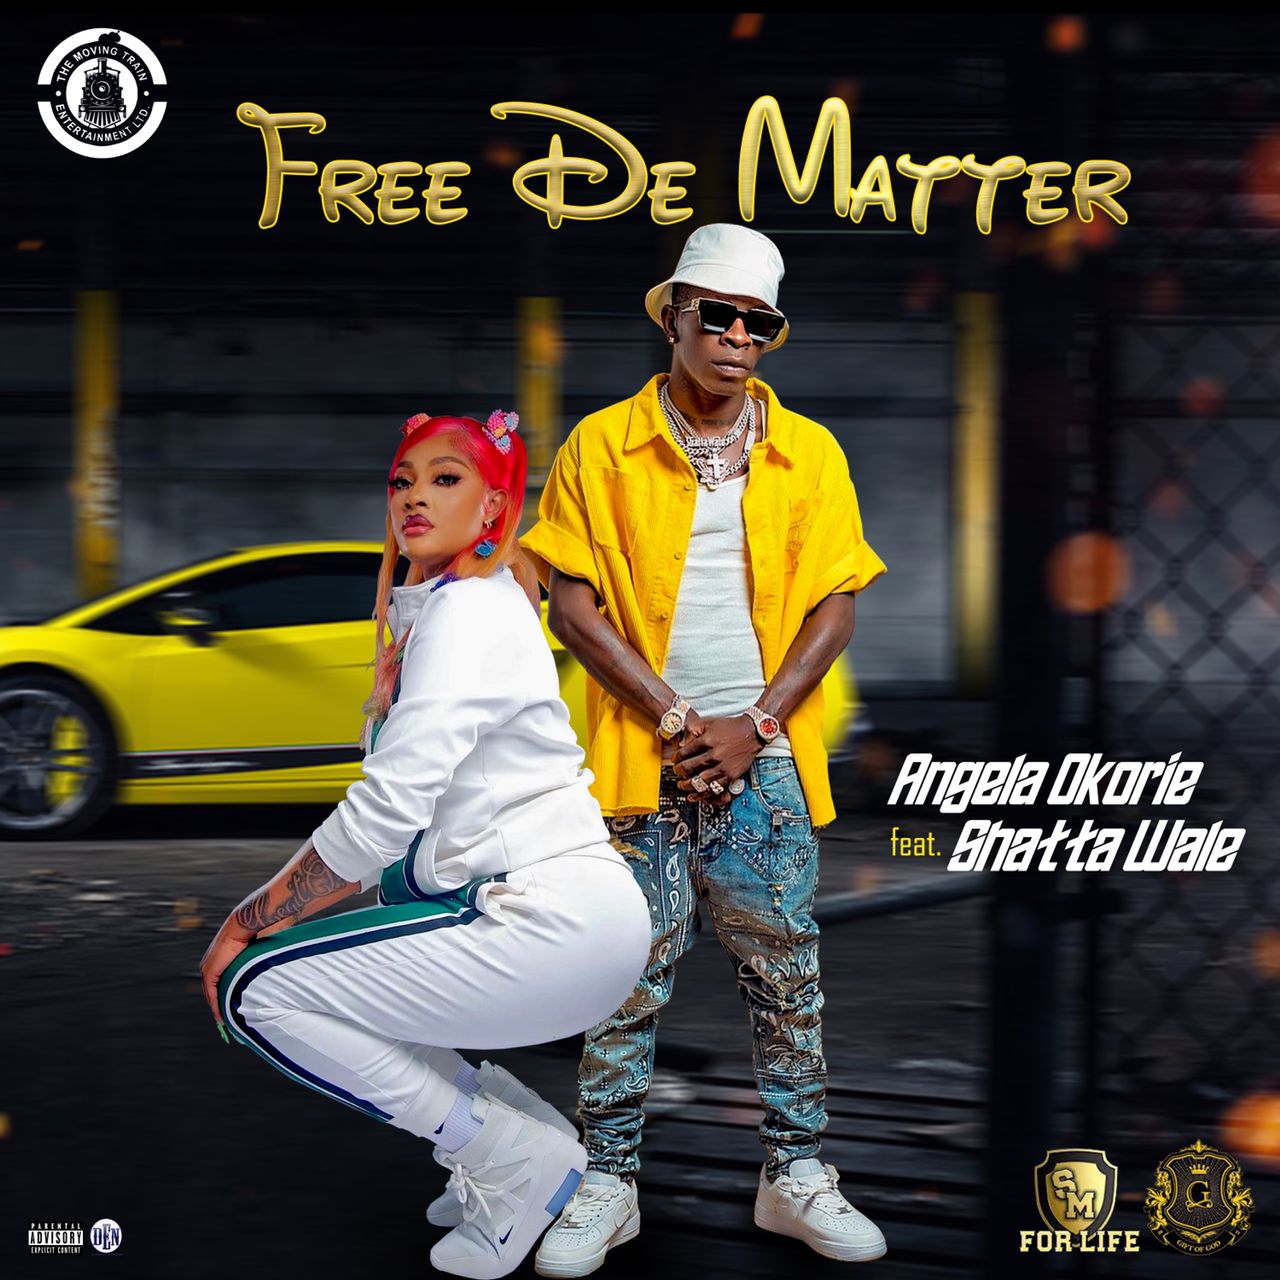 Angela Okorie joined forces with Shatta Wale to serve us with new single titled Free De Matter